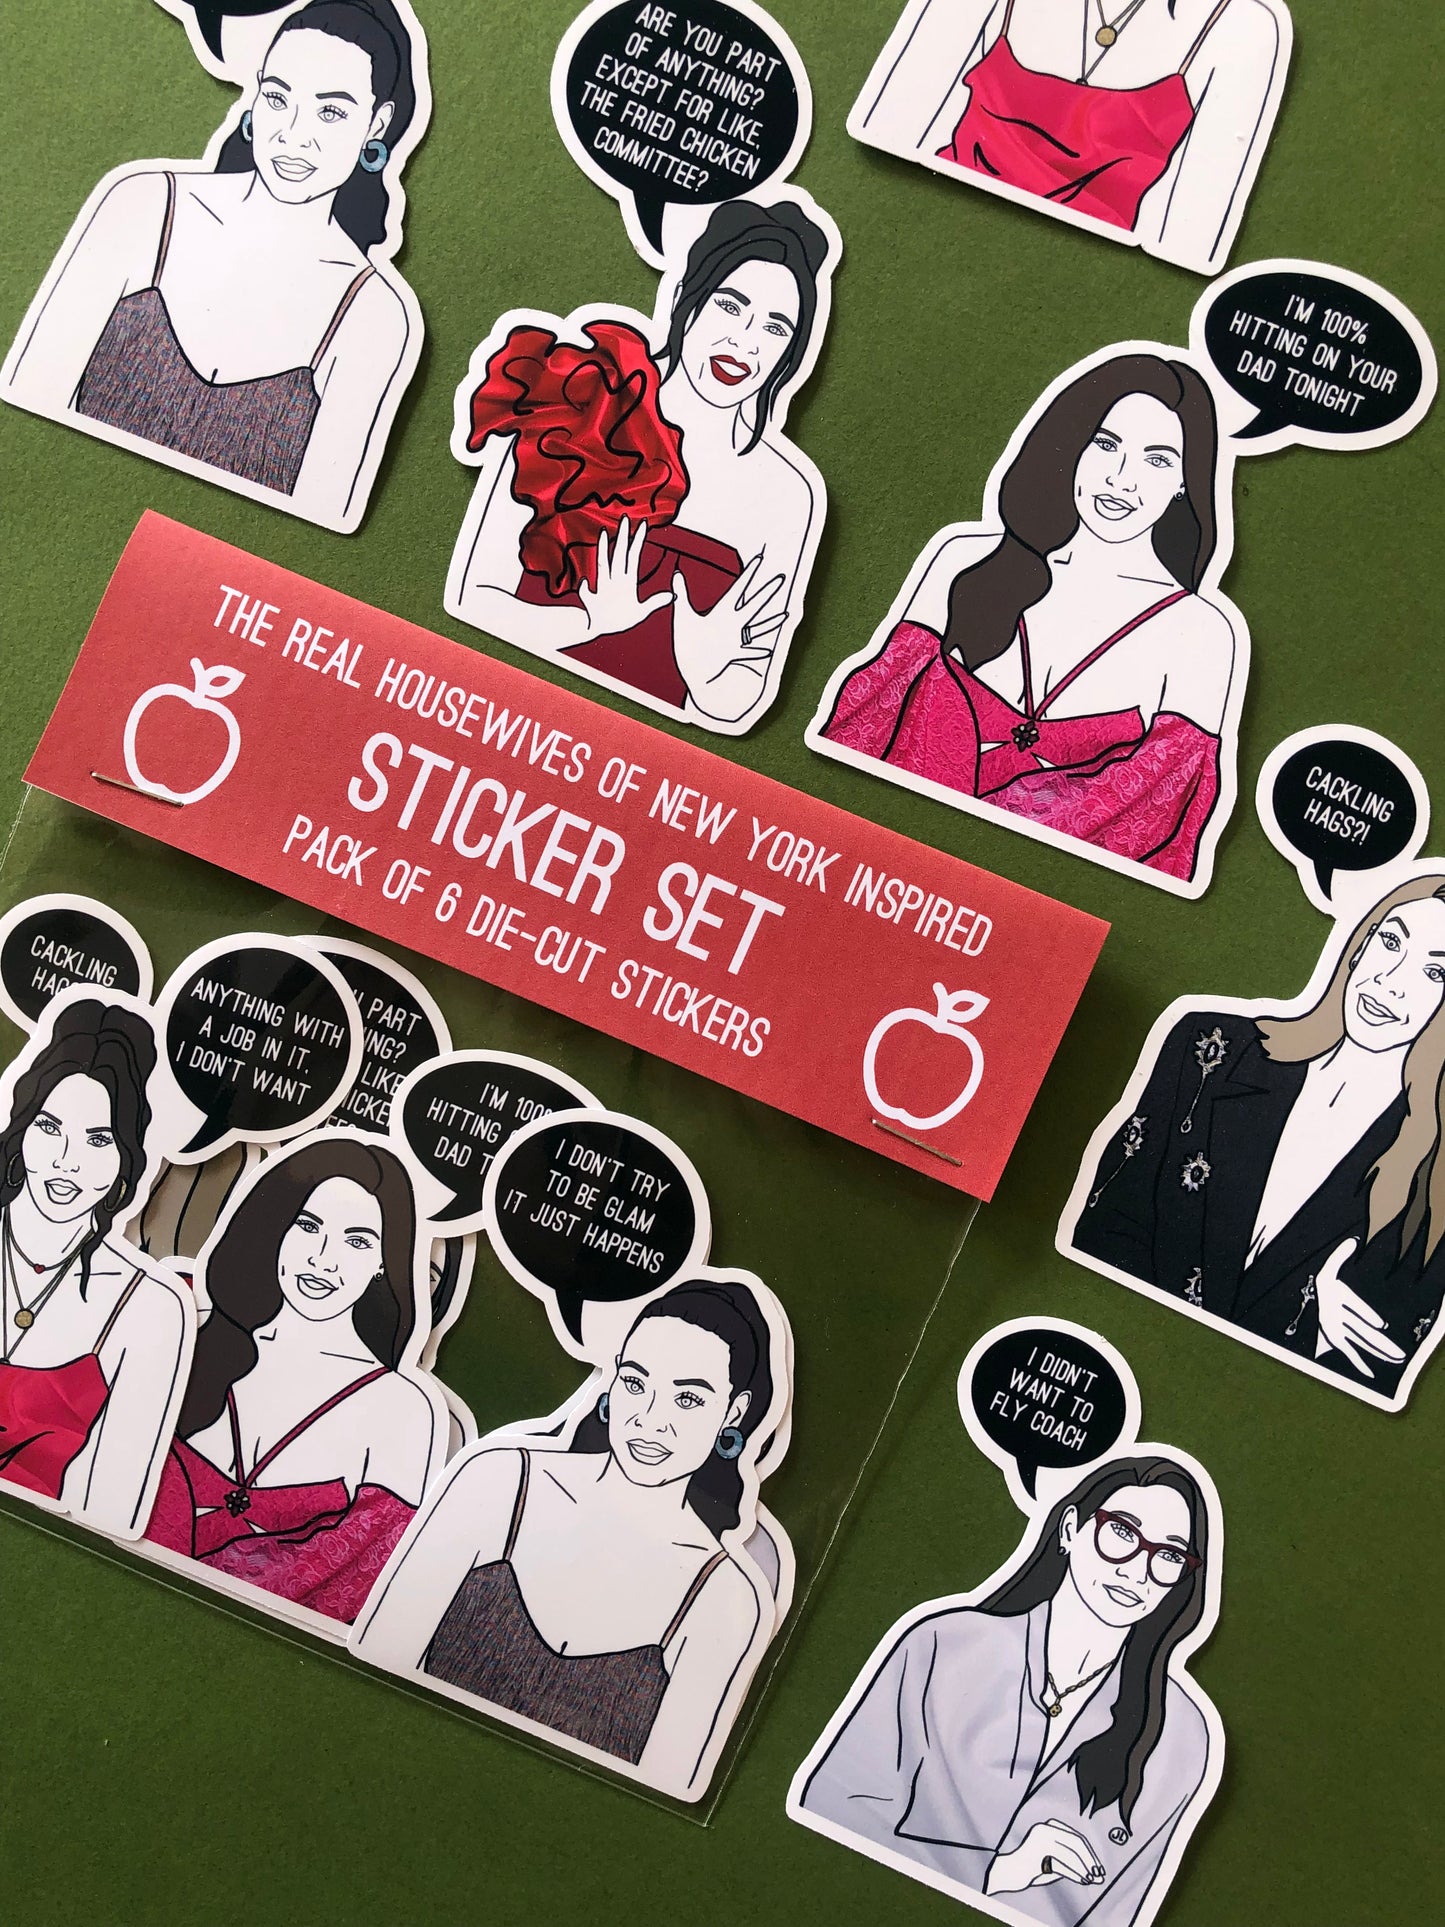 Real Housewives of New York inspired Sticker Set